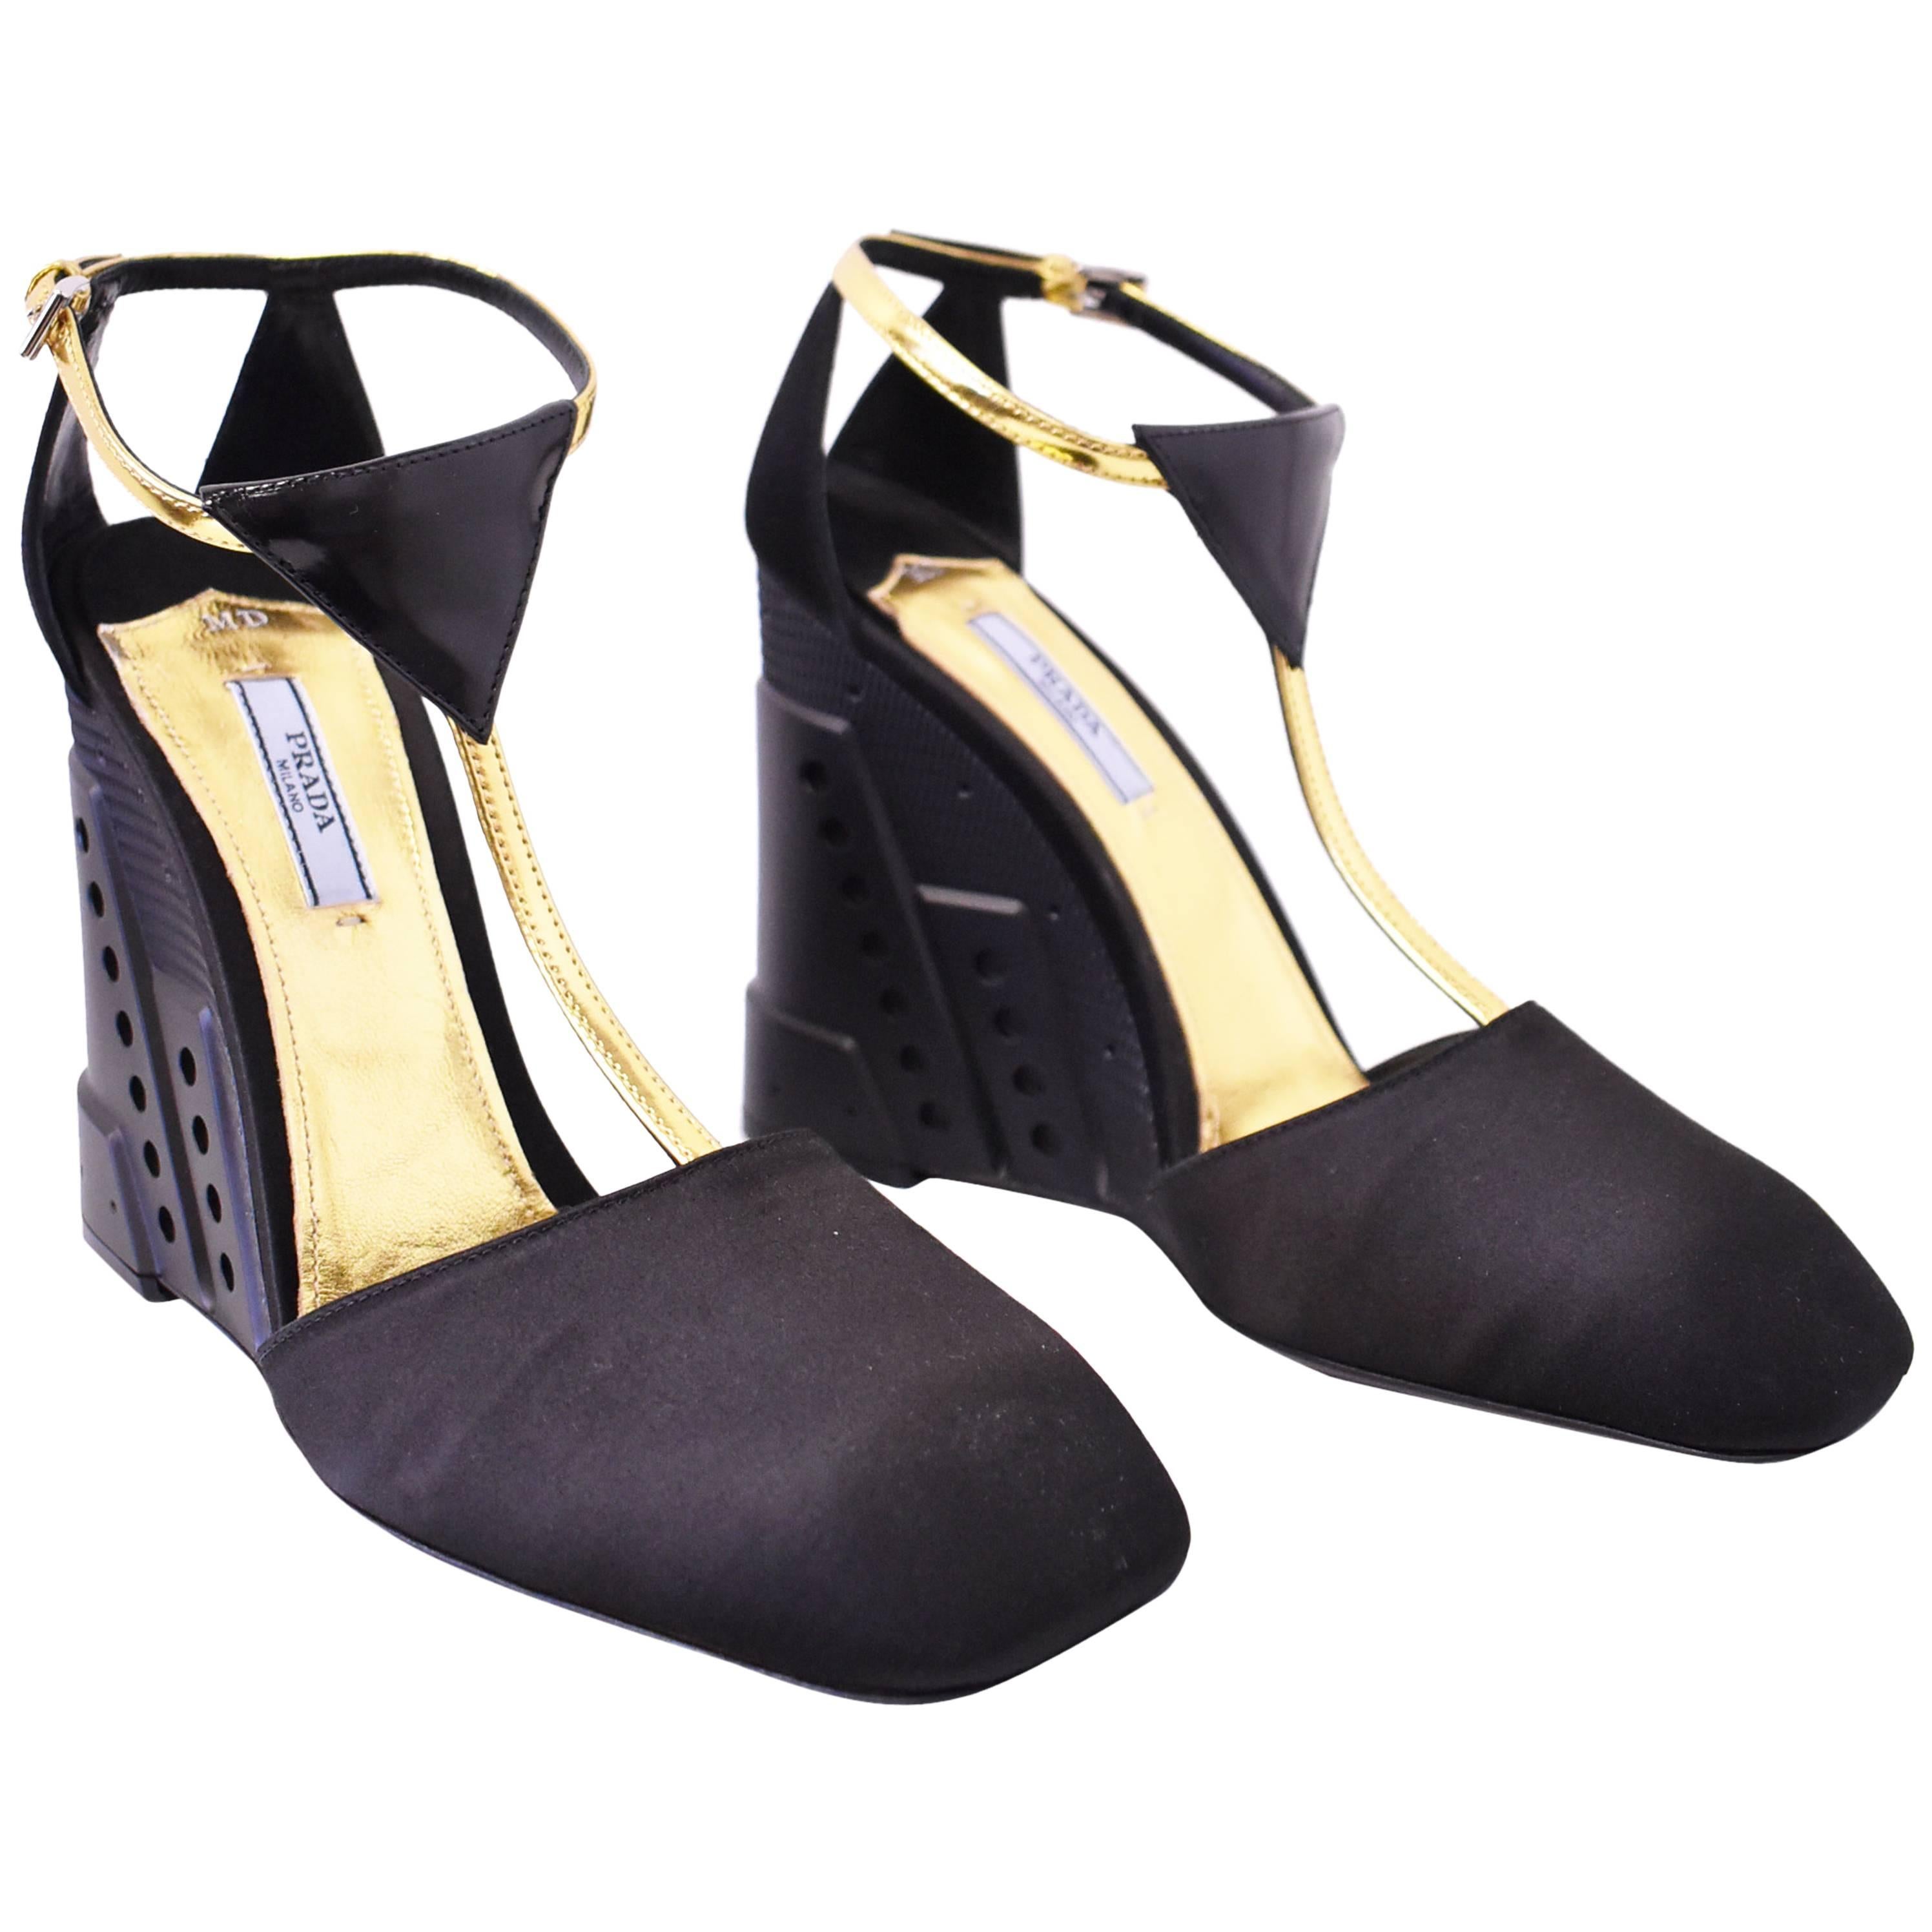 Prada Black Wedge Shoes with Gold Ankle Strap Unworn with Box and Dustbag A/W 14 For Sale